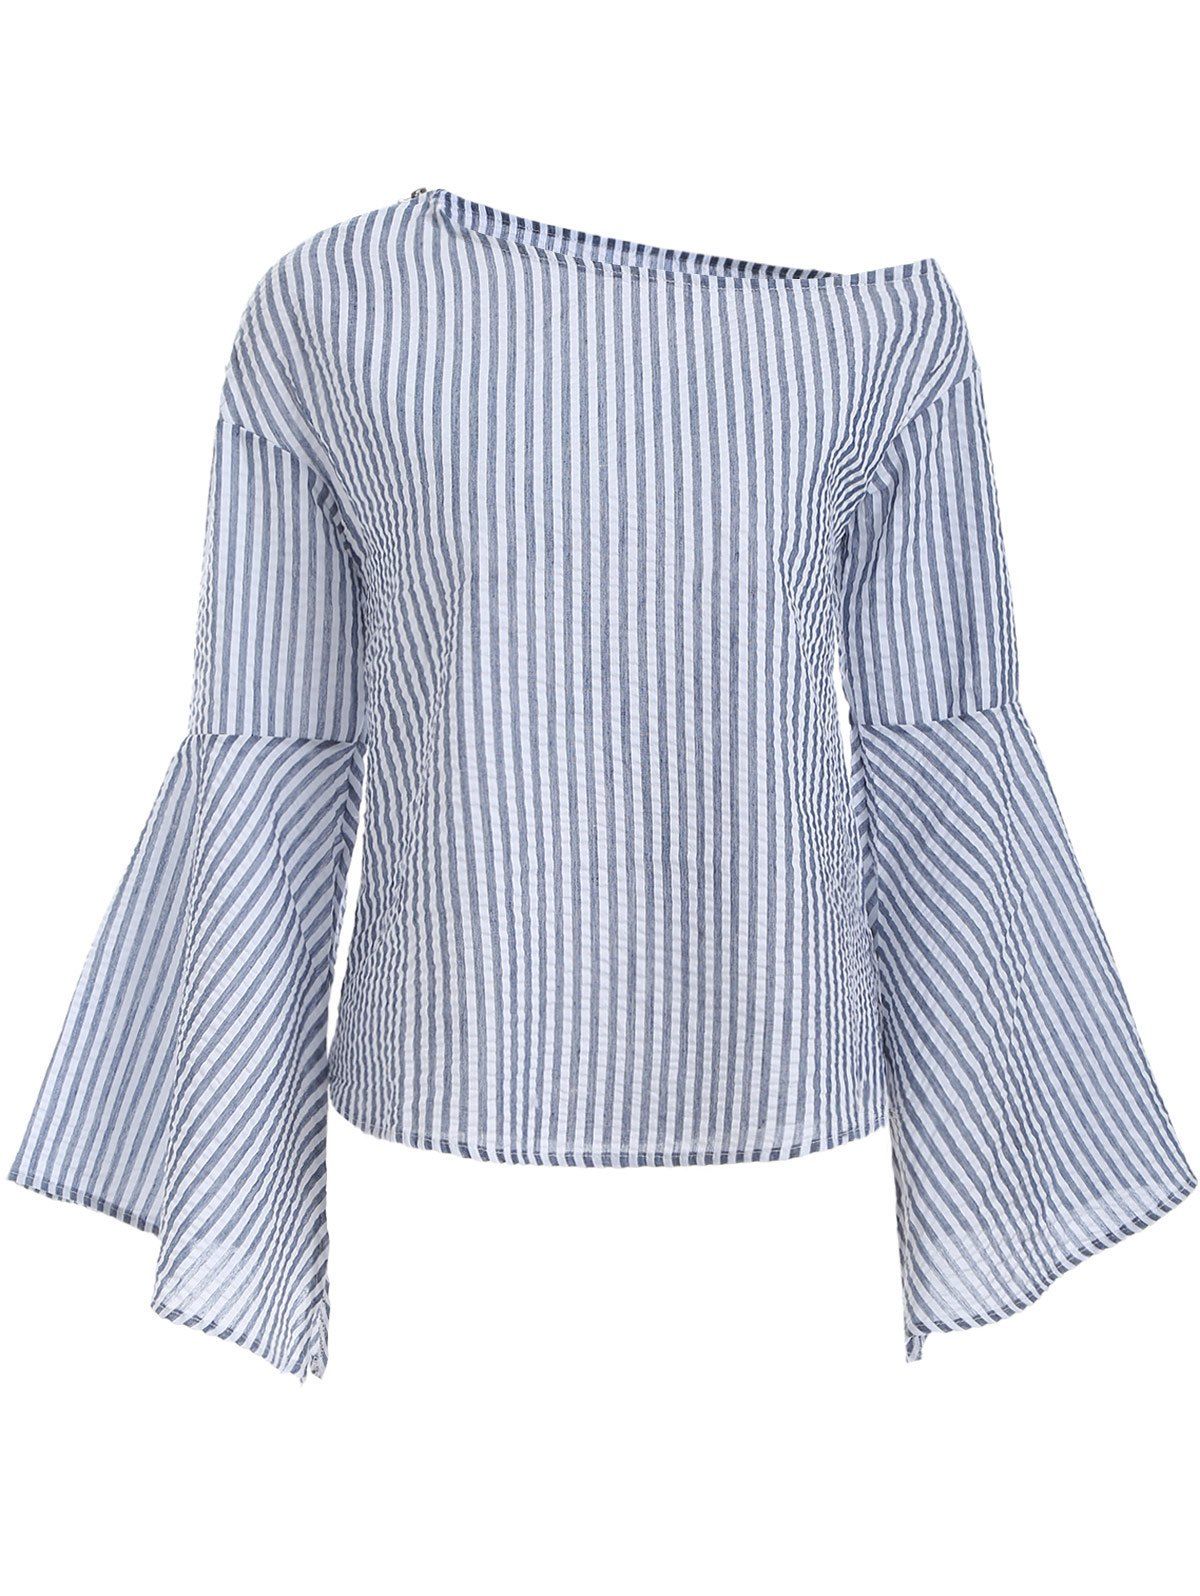 [65% OFF] Striped Print Bell Sleeves Blouse | Rosegal